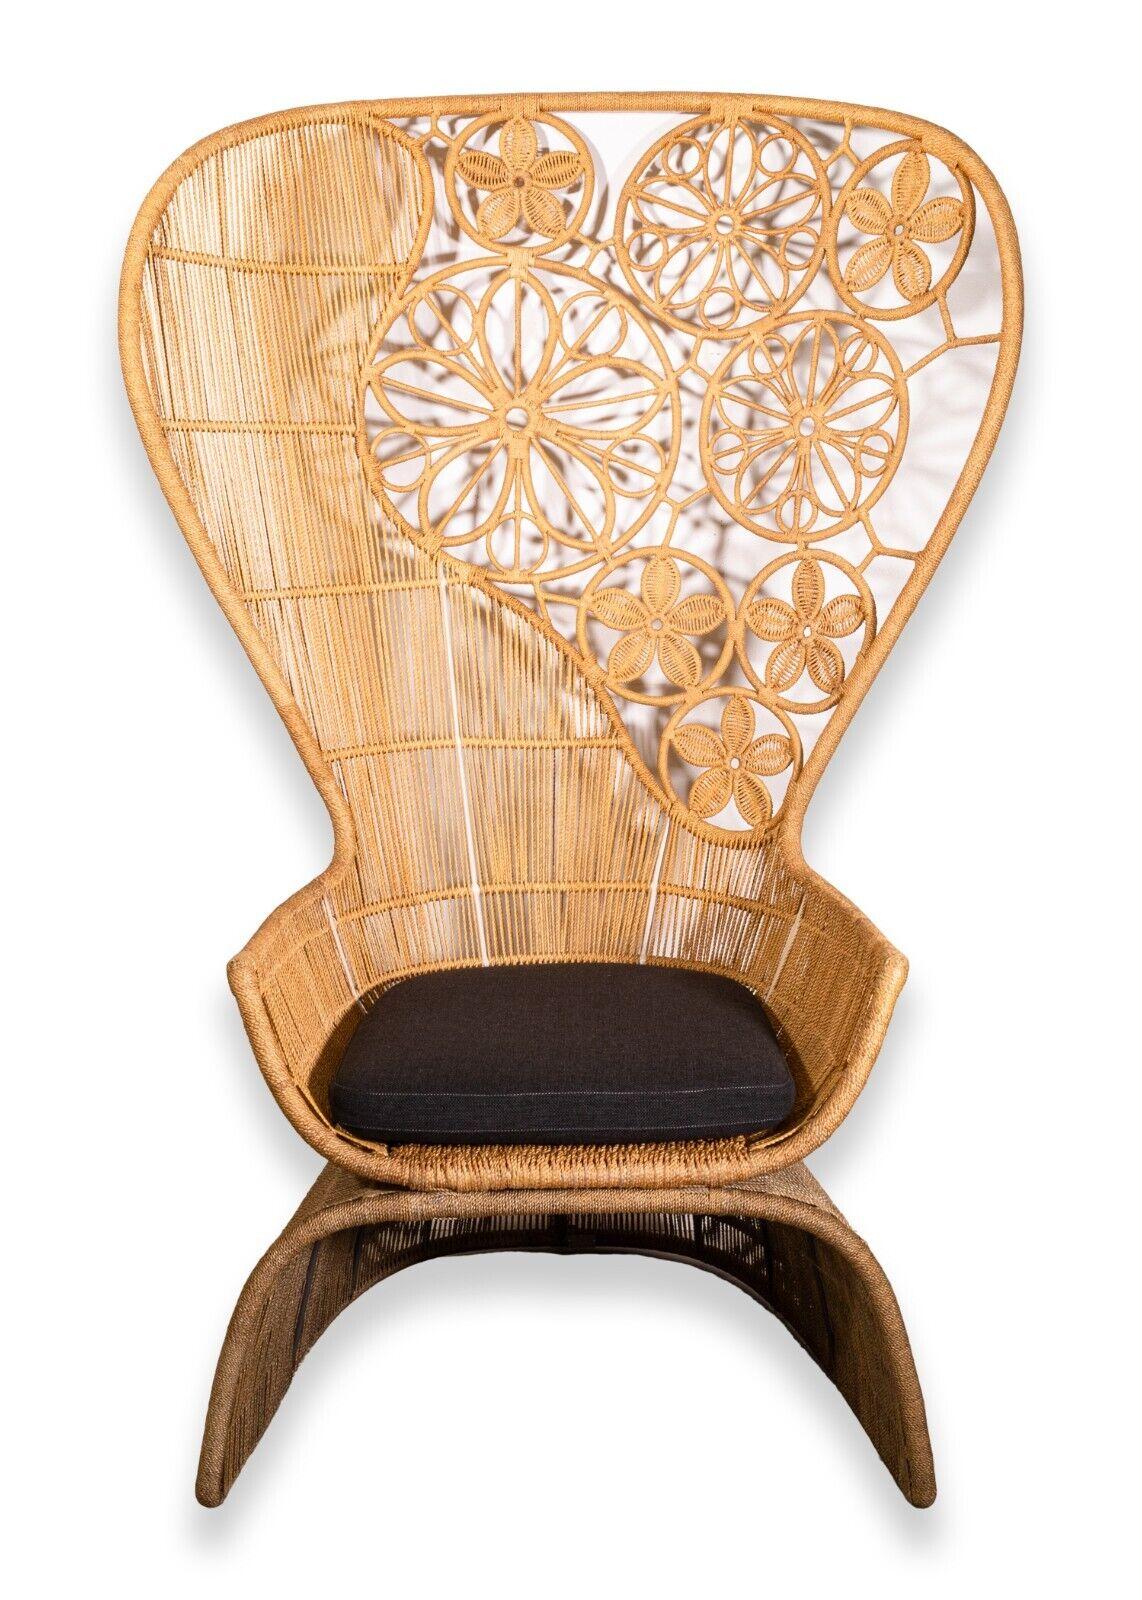 A B&B Italia Crinoline high armchair. This marvelous piece from legendary designers B&B Italia features an iconic peacock chair design. This chair, intented for outdoor use, features a very robust construction and design featuring raised floor